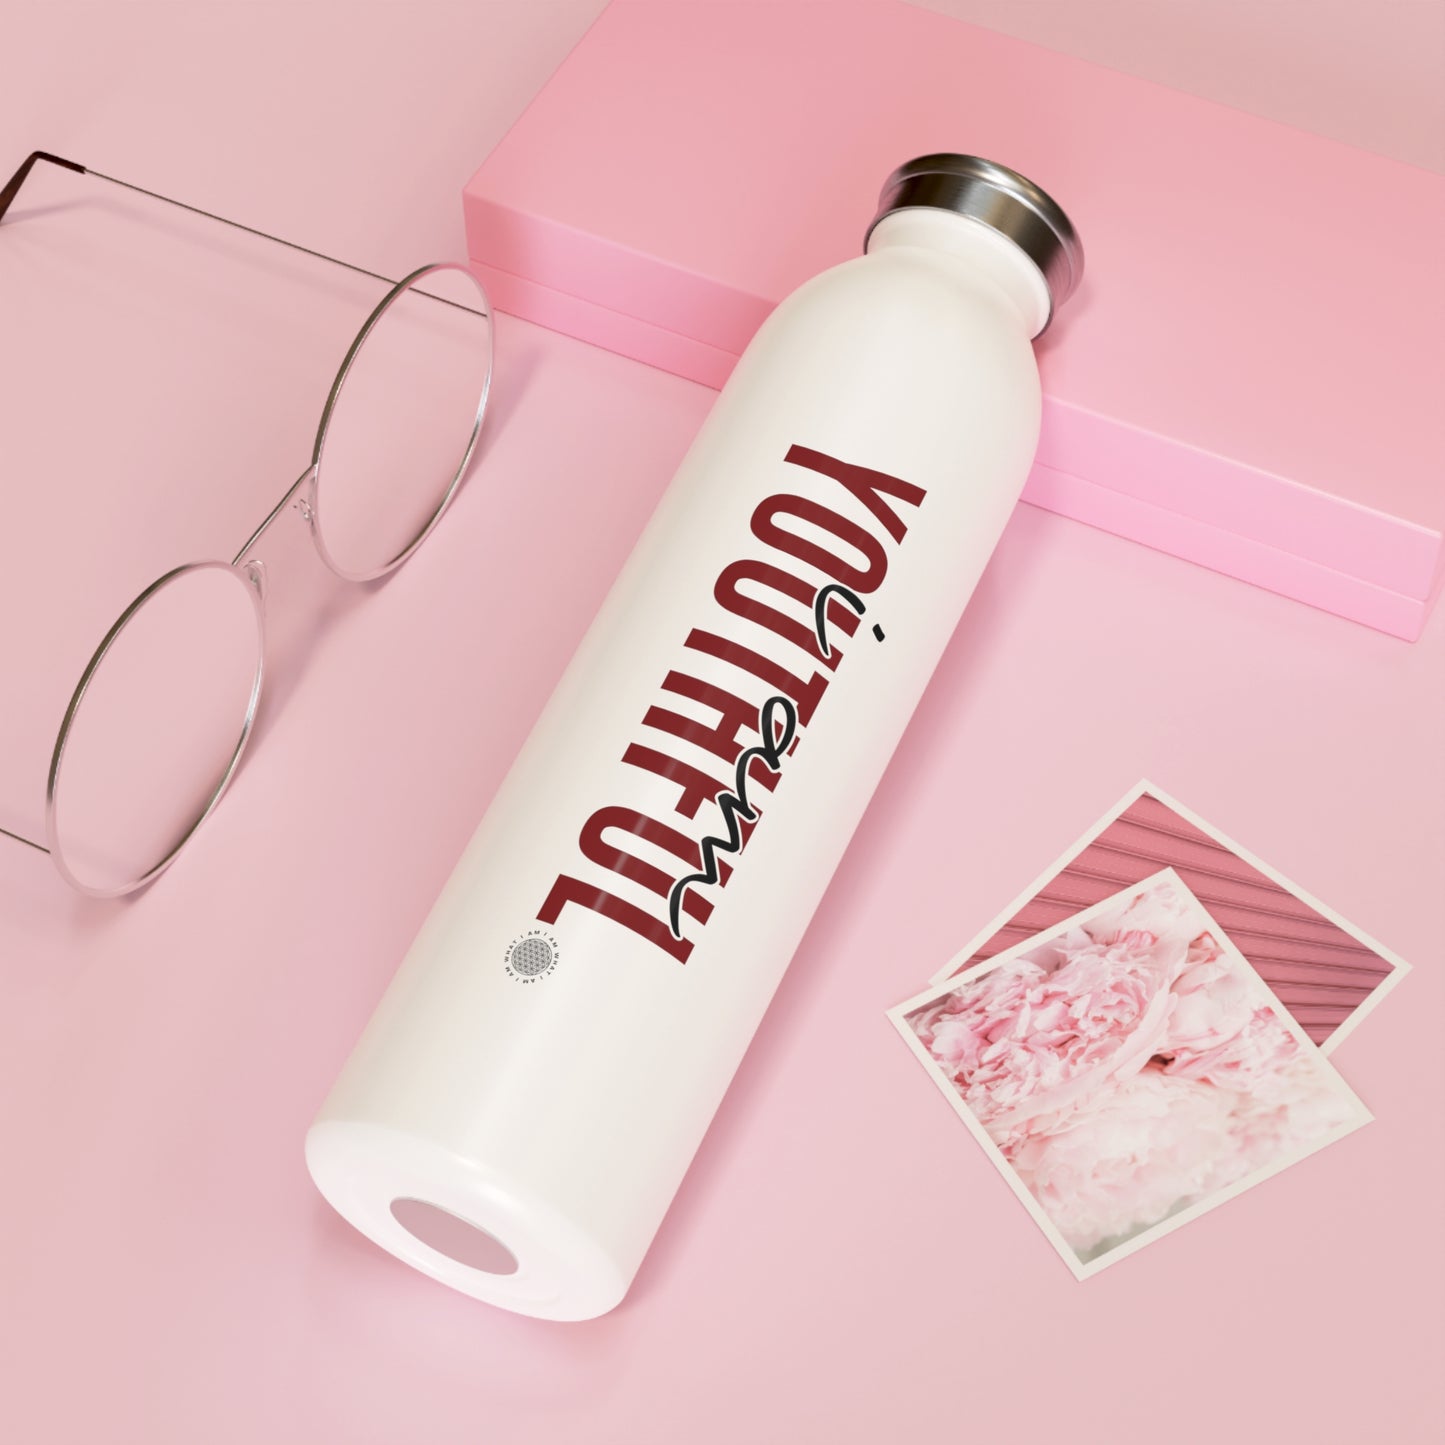 Our I Am Youthful Slim Water Bottle is the perfect companion for your active lifestyle. This sleek and stylish water bottle is designed to fit comfortably in your hand and features a slim profile that fits easily into your bag or backpack